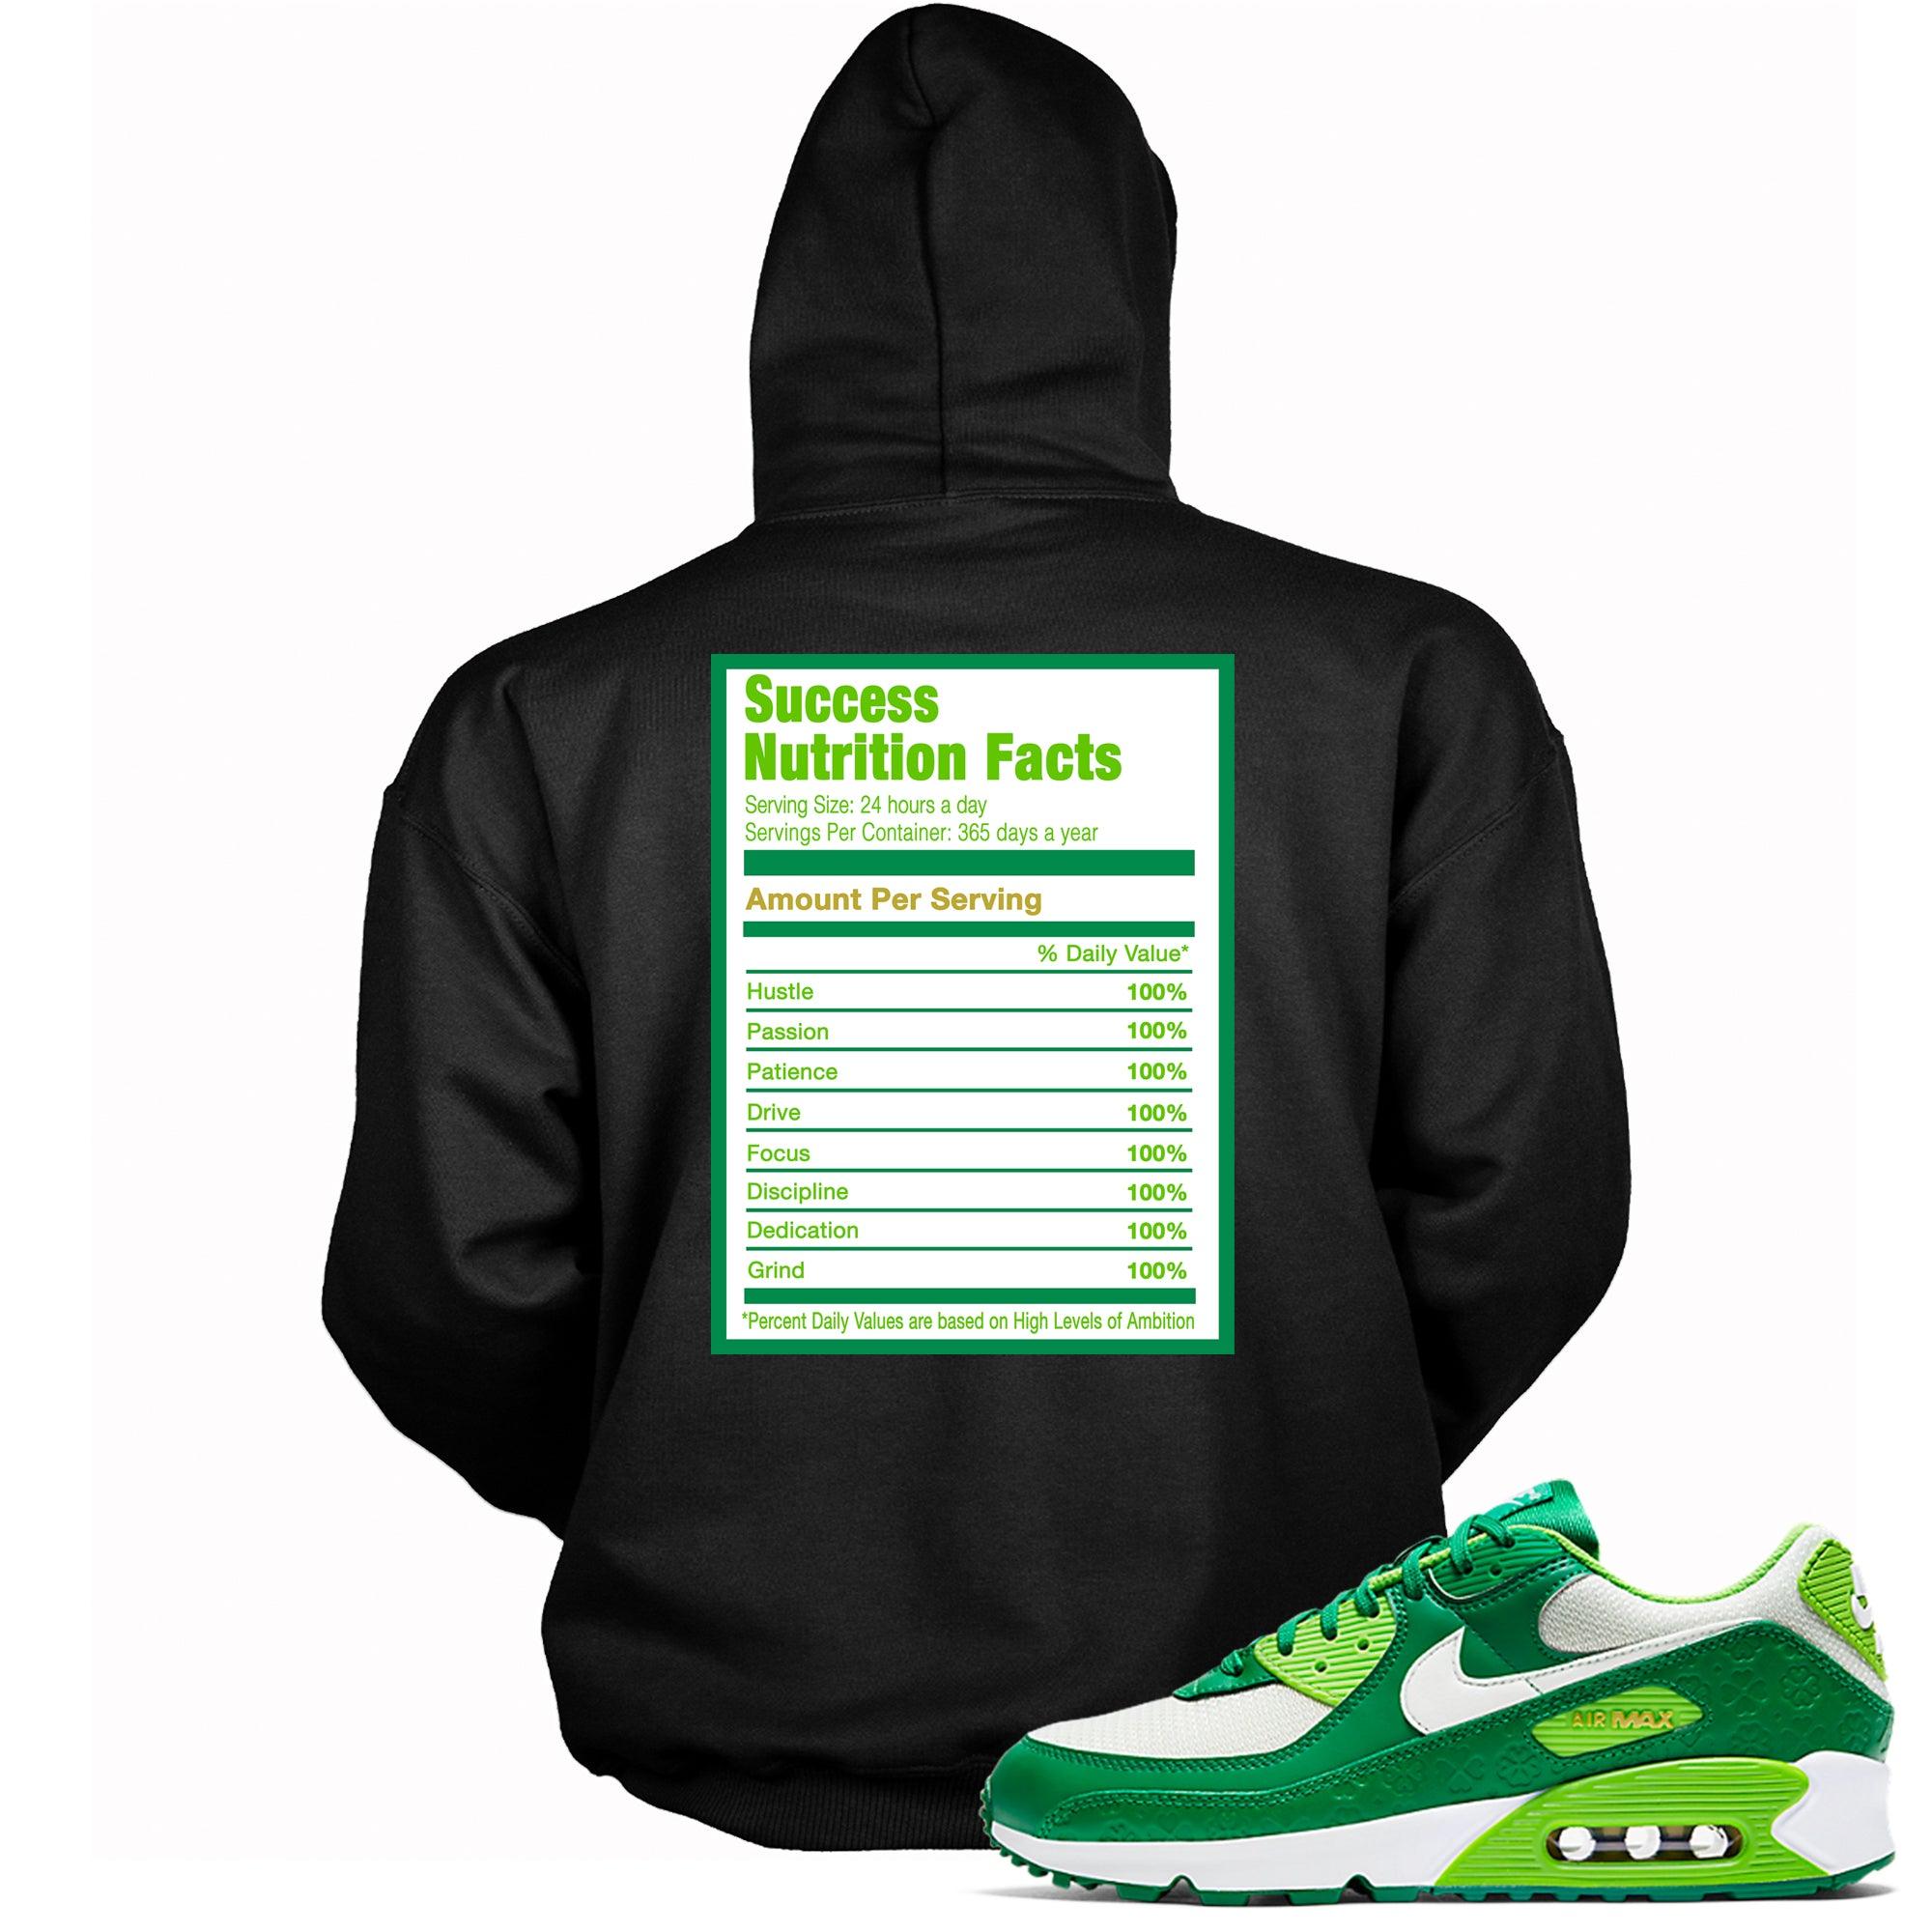 Black Success Nutrition Facts Hoodie Nike Air Max 90 St Patricks Day 2021 photo